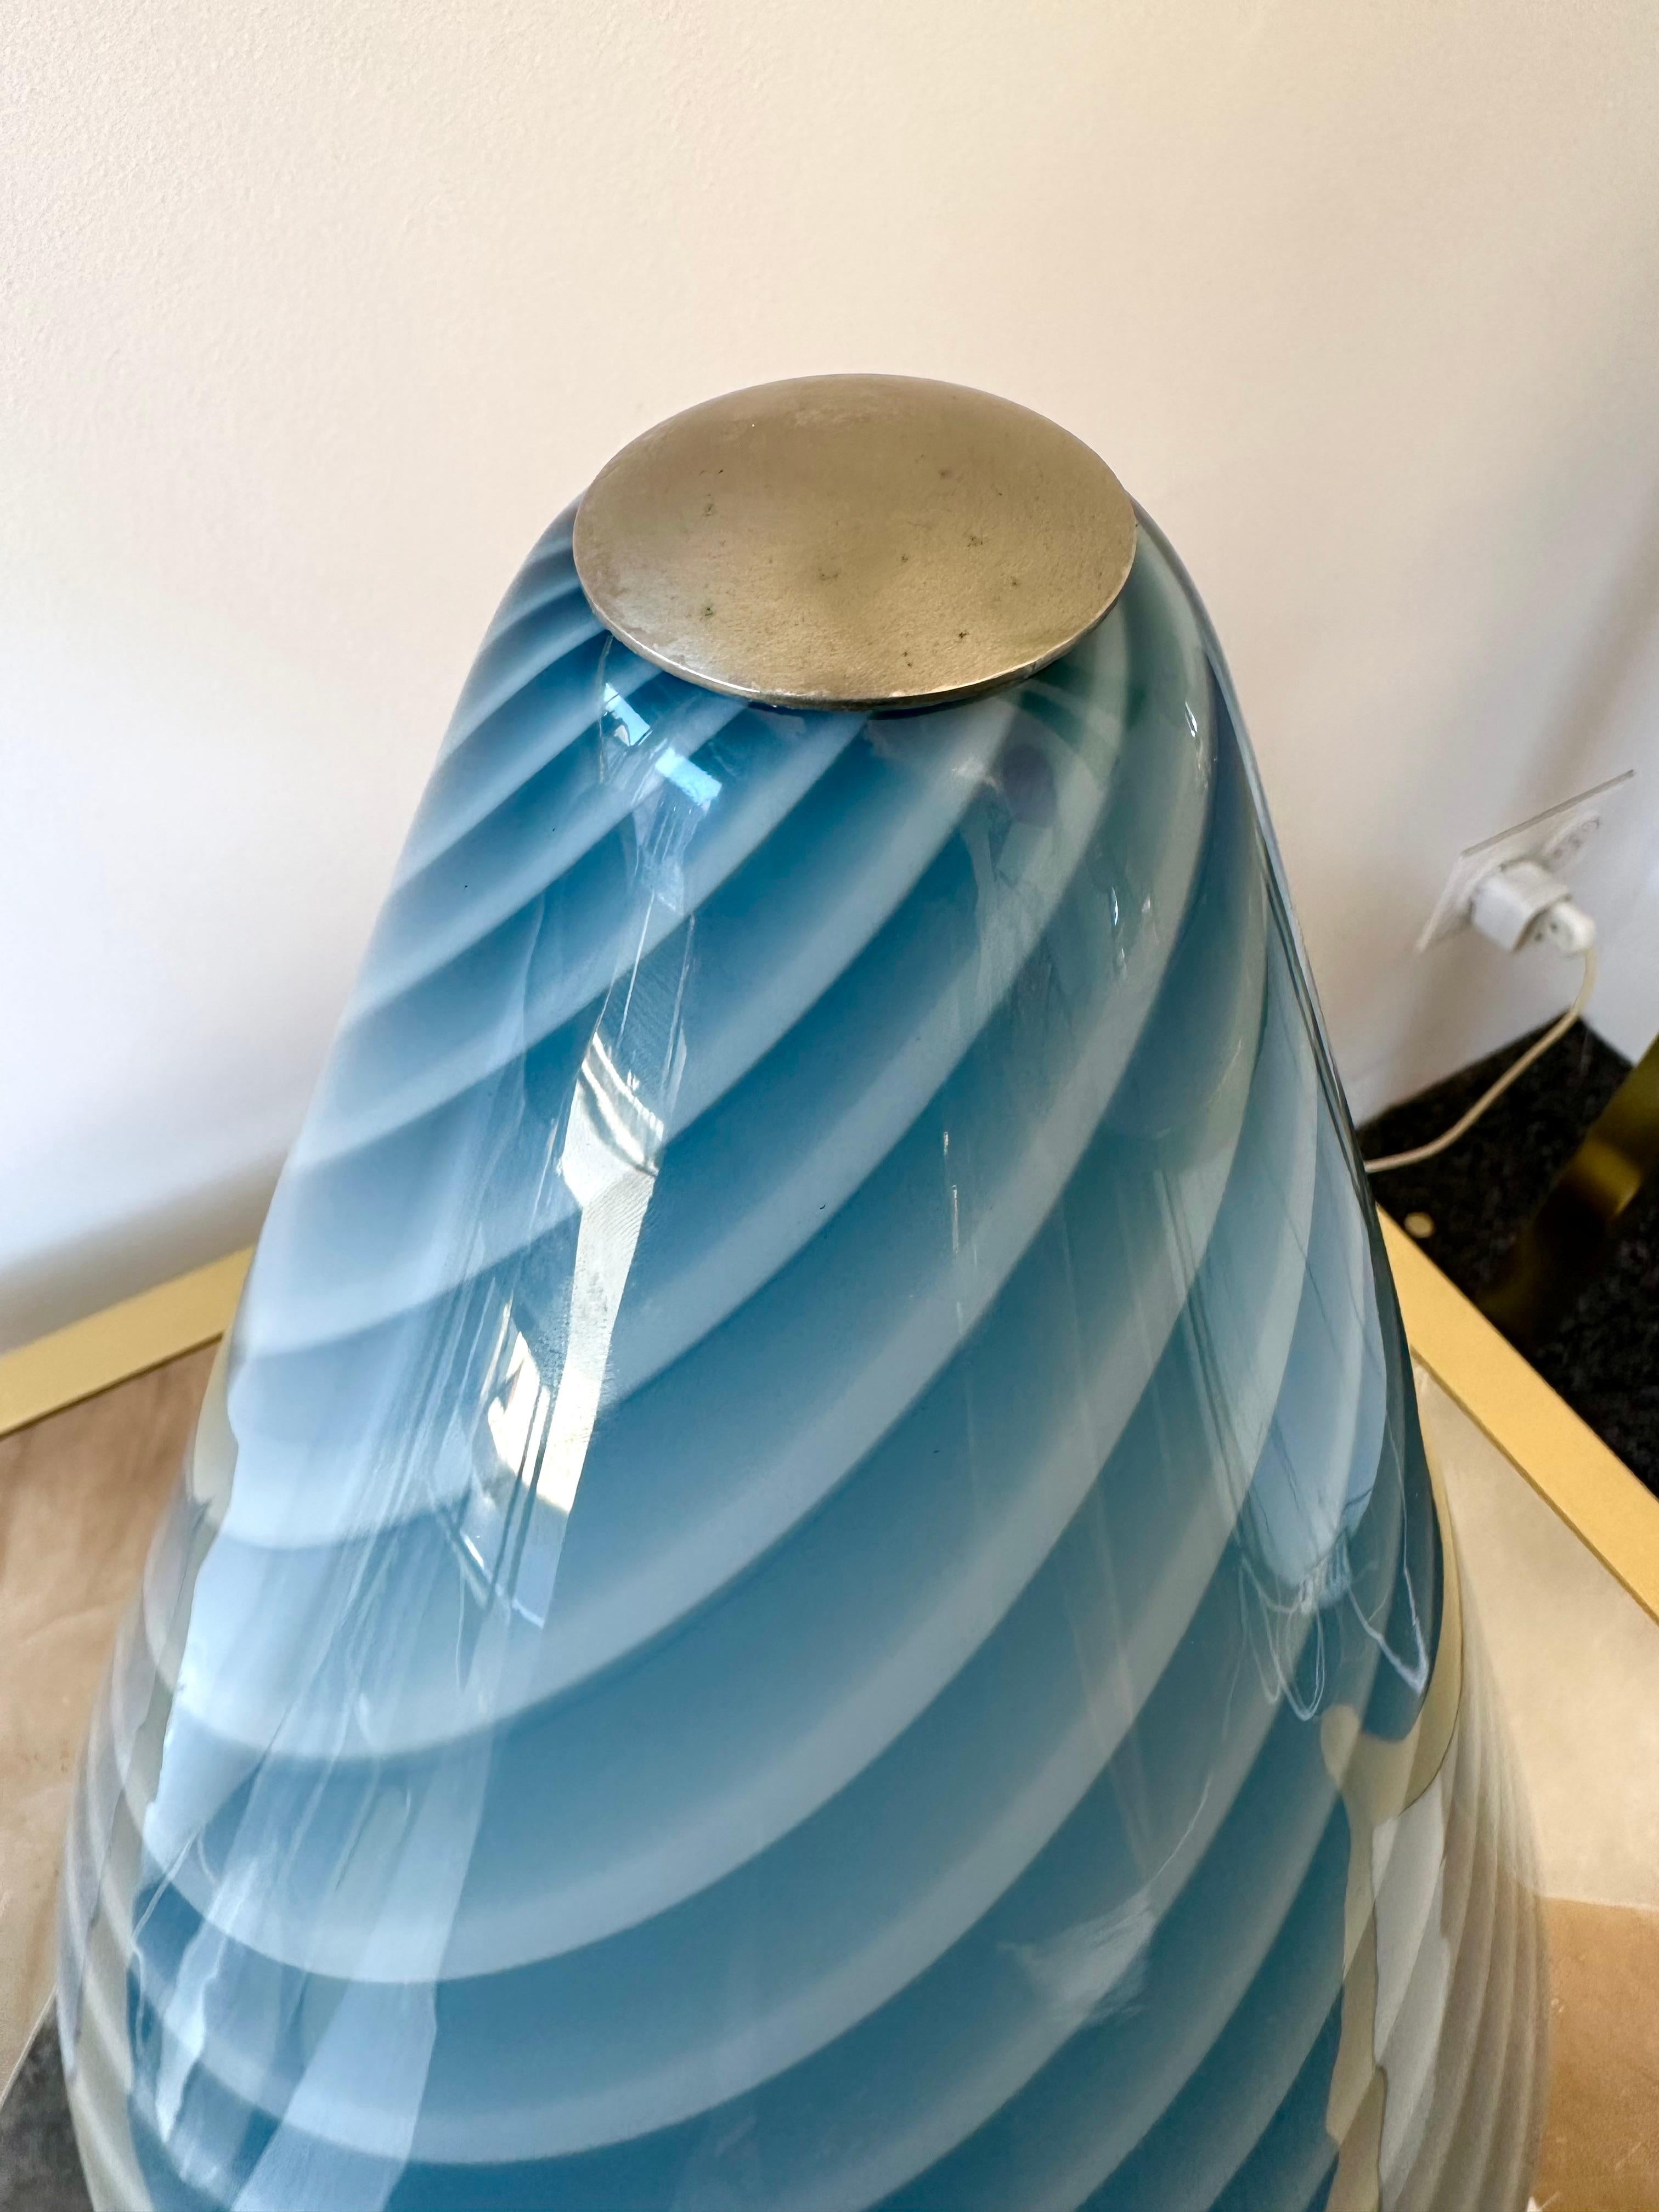 Blue Spiral Murano Glass Lamp by La Murrina, Italy, 1970s For Sale 5